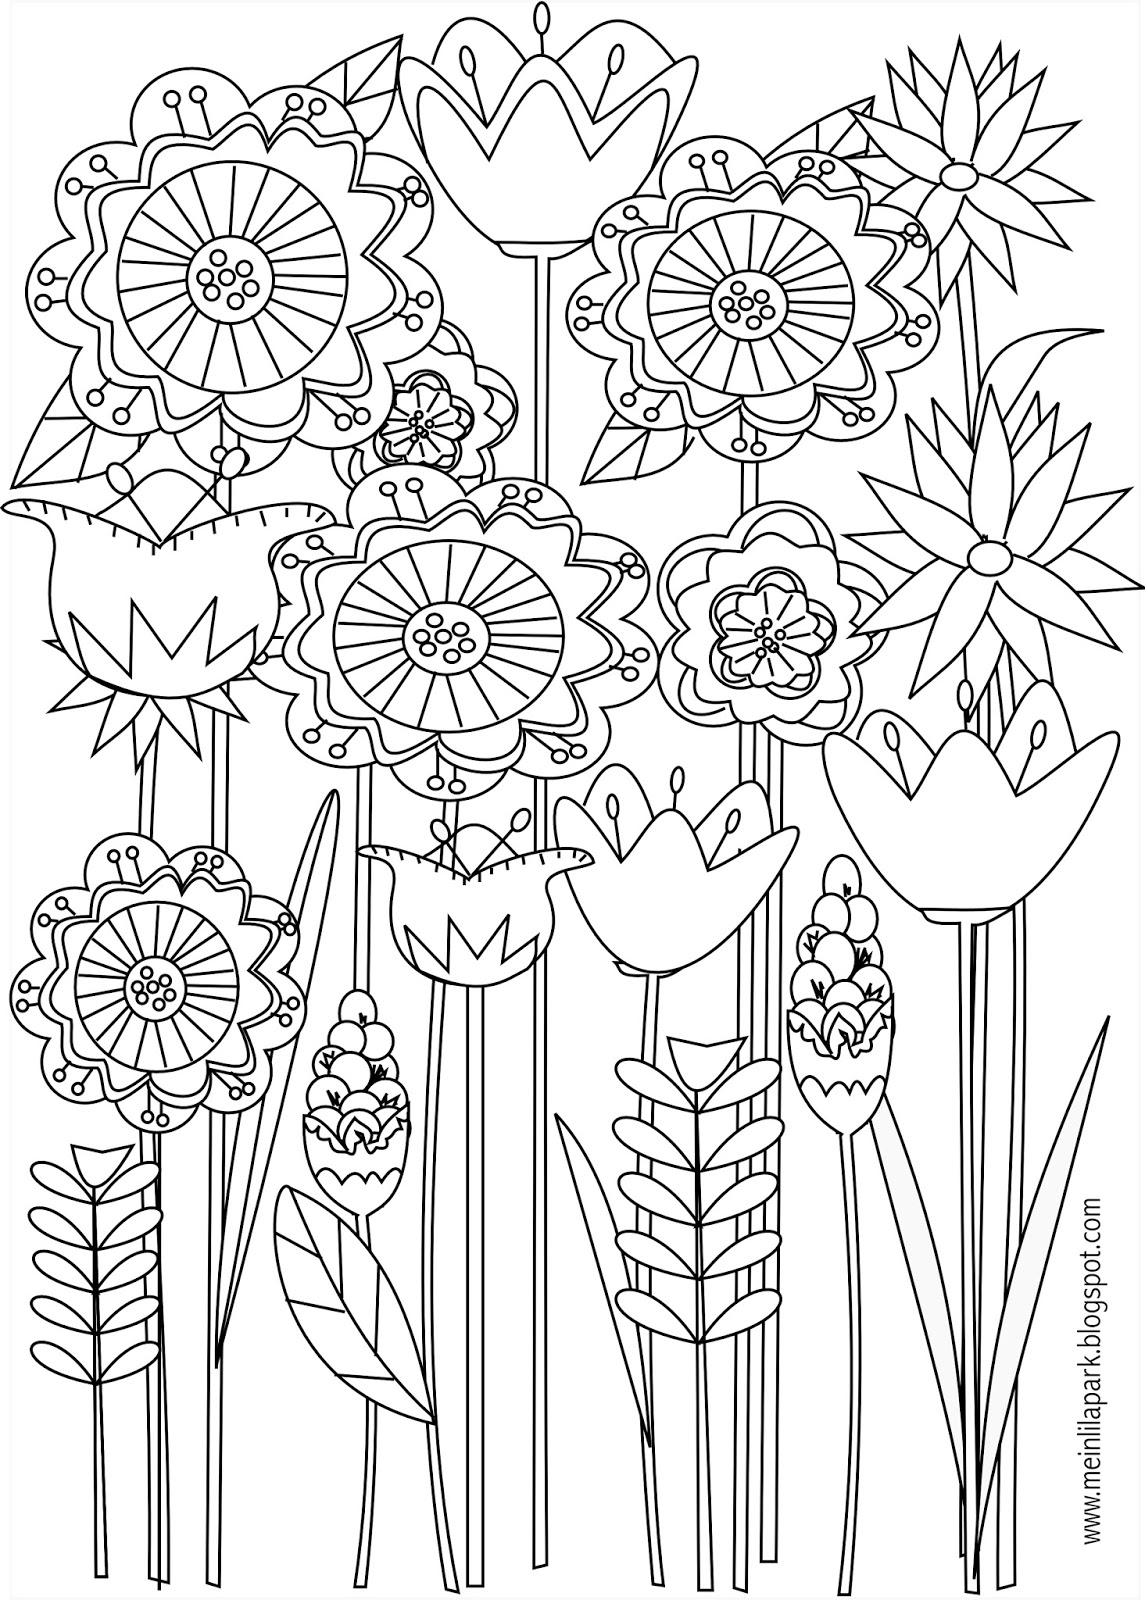  Free  printable  spring  coloring  pages  Ausmalbilder 